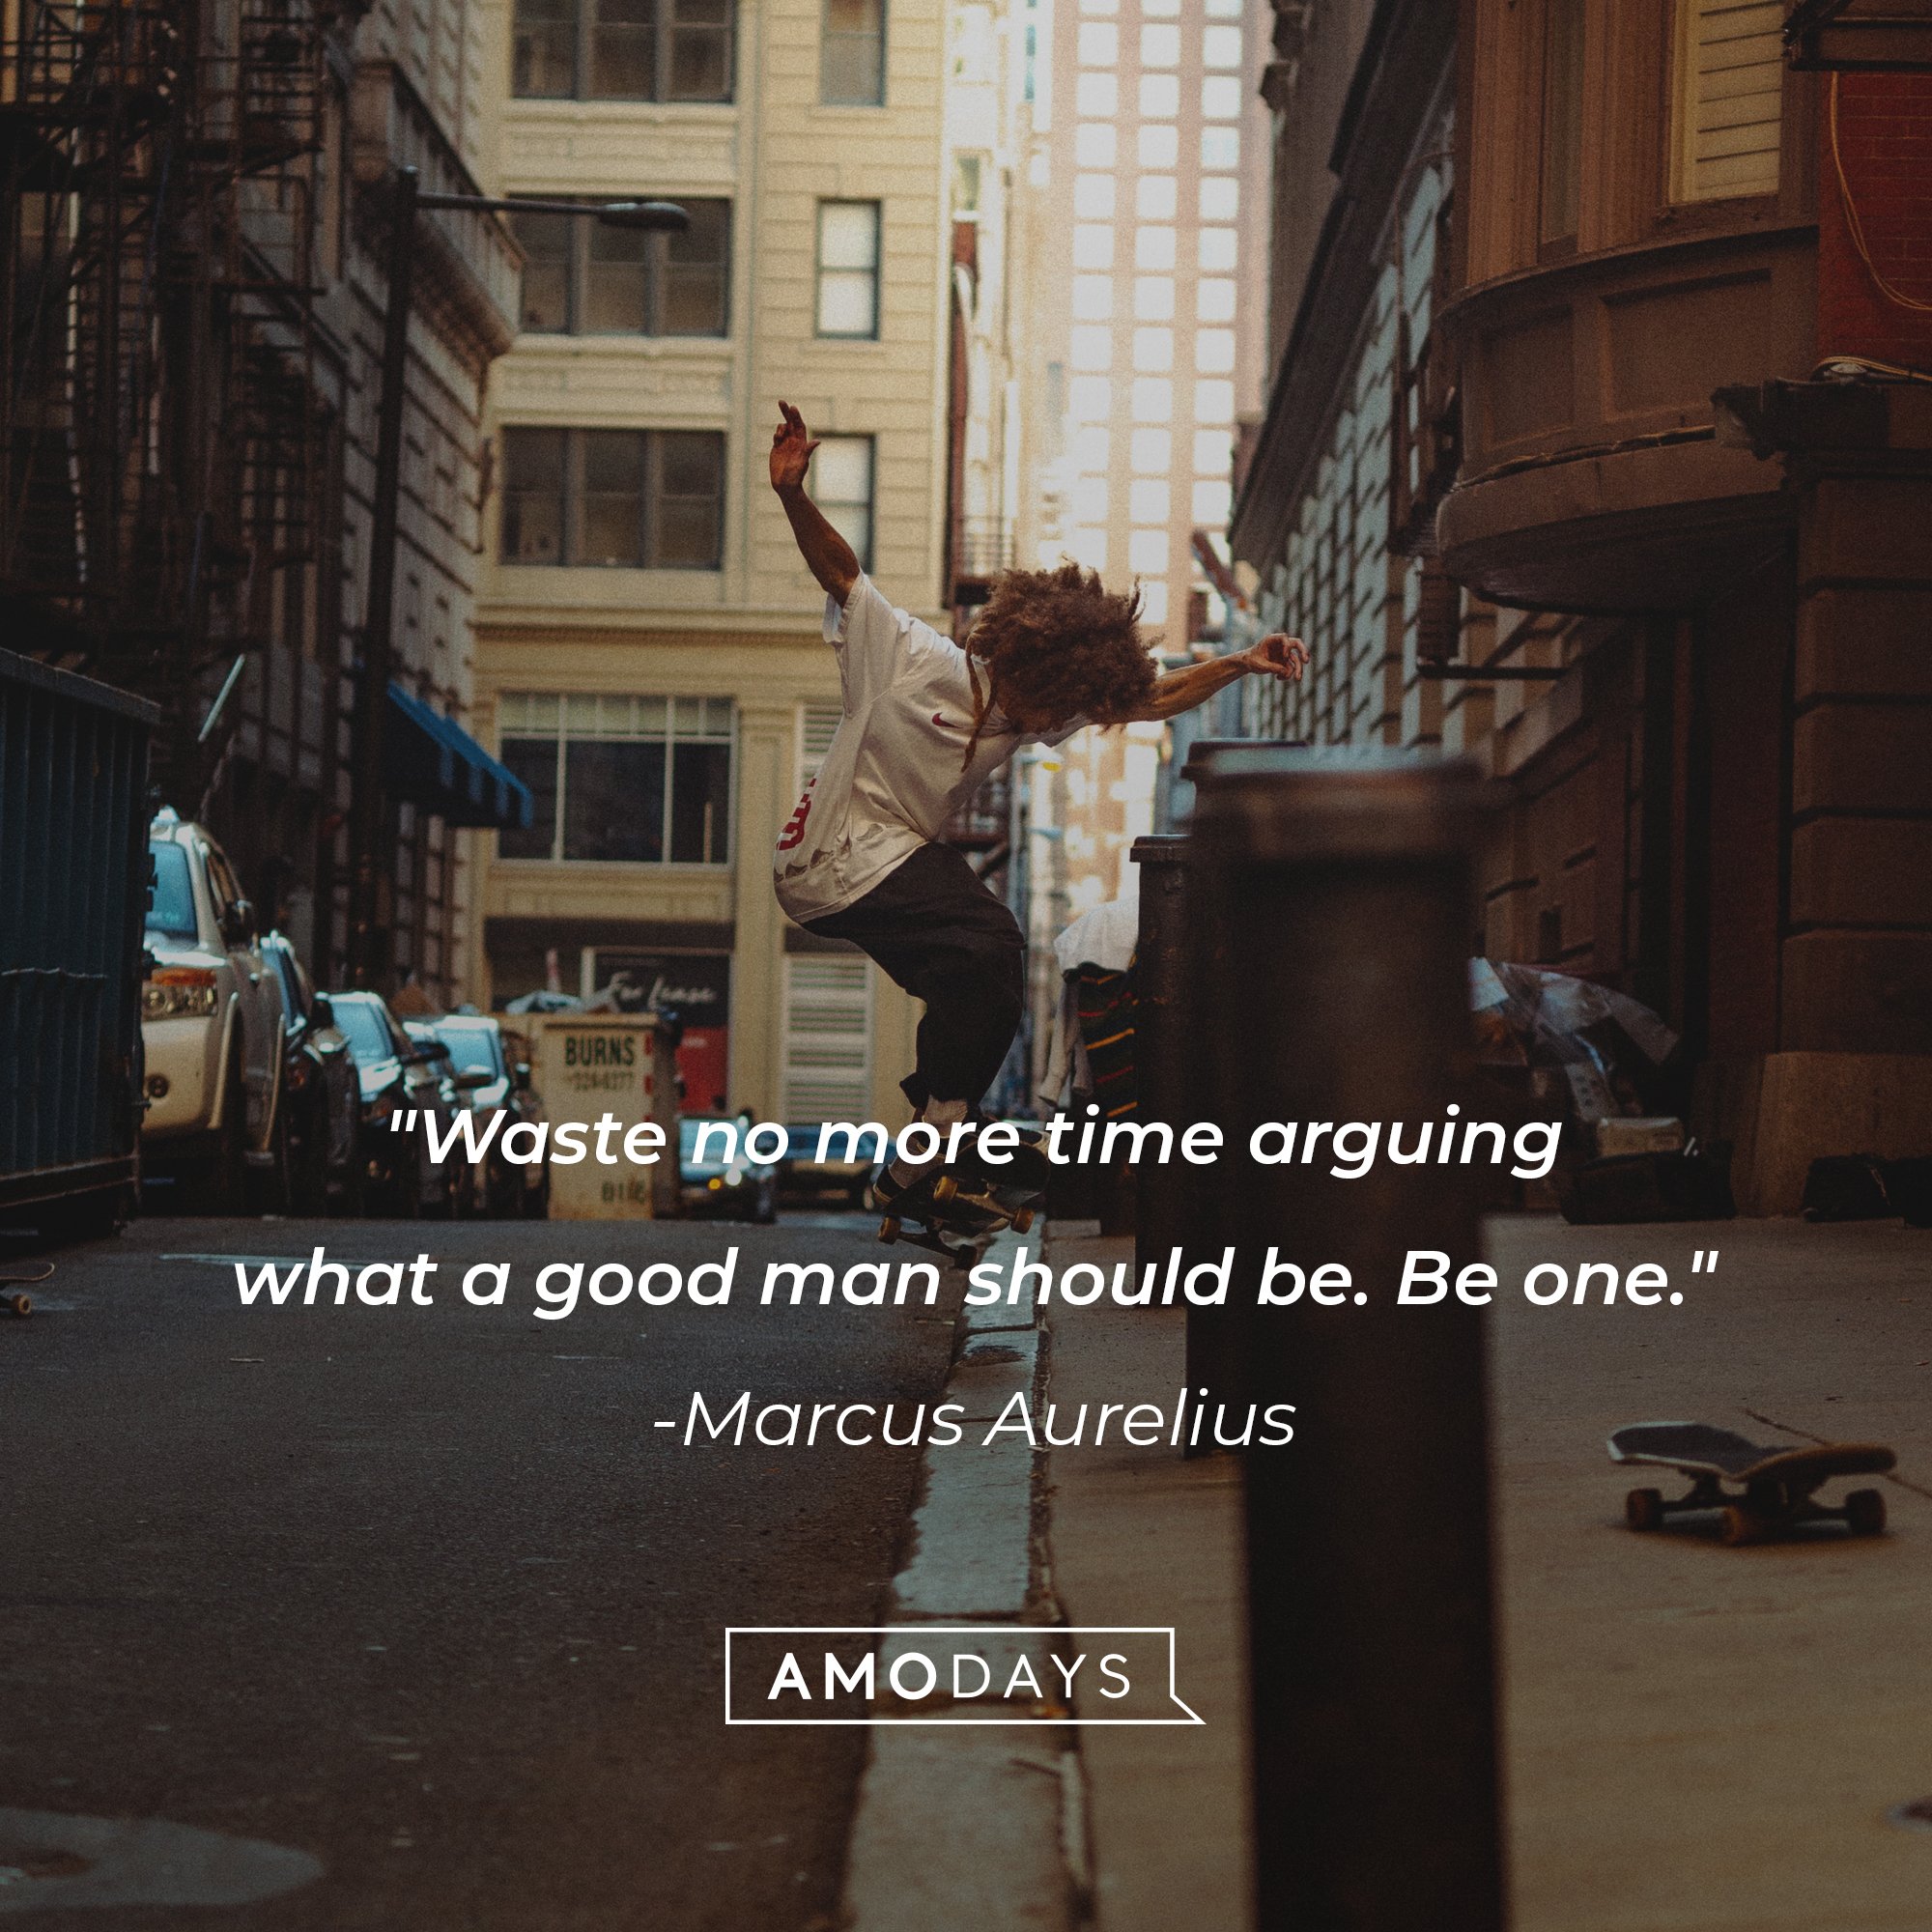 Marcus Aurelius’ quote: "Waste no more time arguing what a good man should be. Be one." | Image: AmoDays 